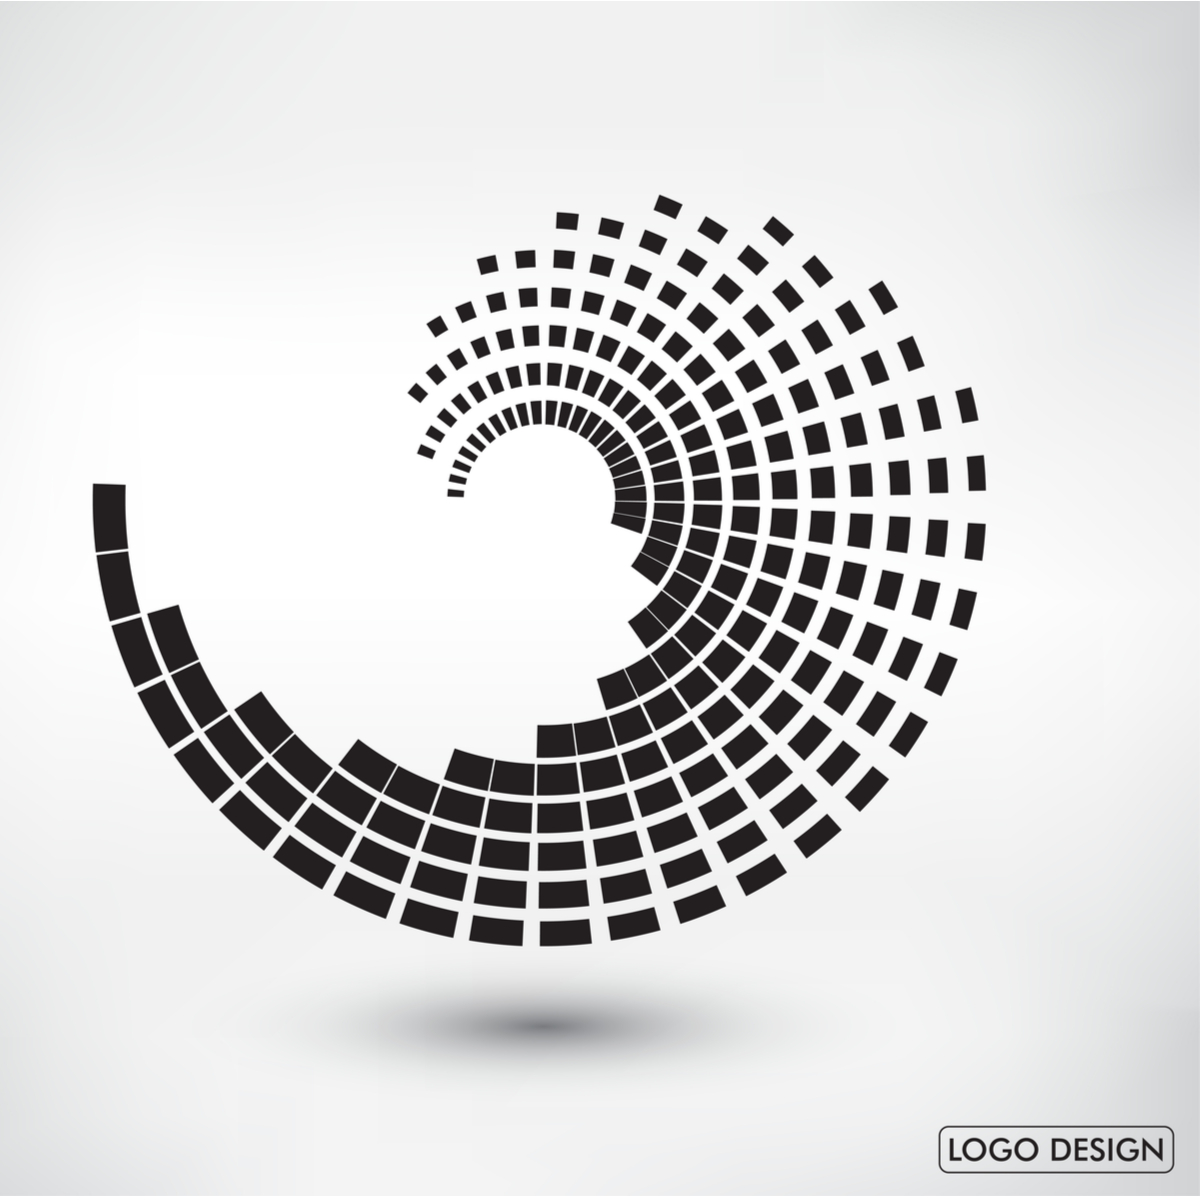 Technology Logo Design Ideas According to Your Need